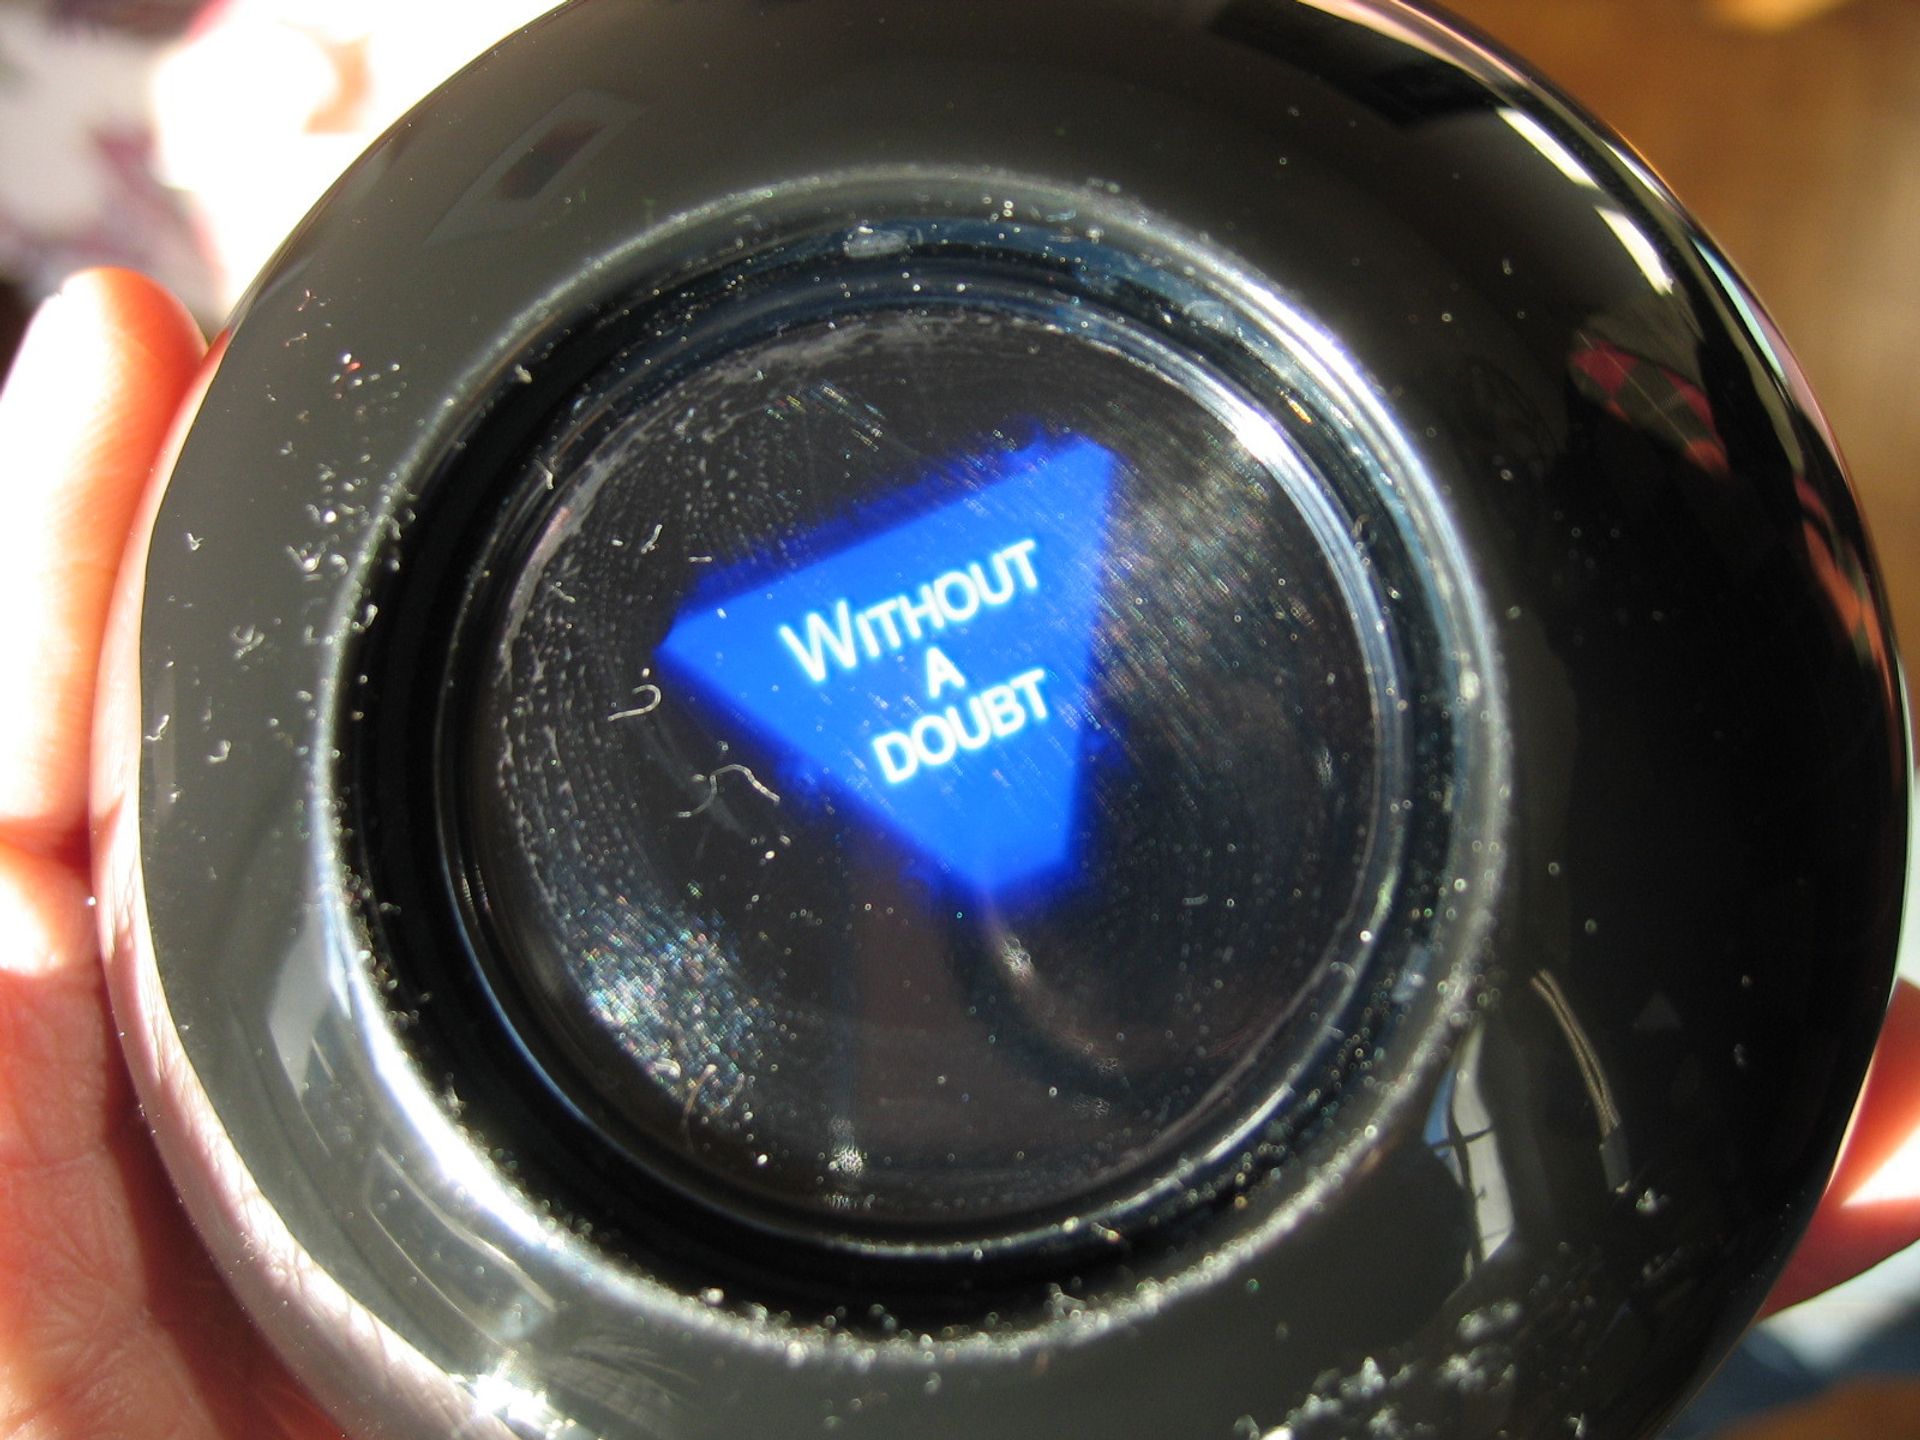 We pull out our magic eight-ball Photo via Flickr